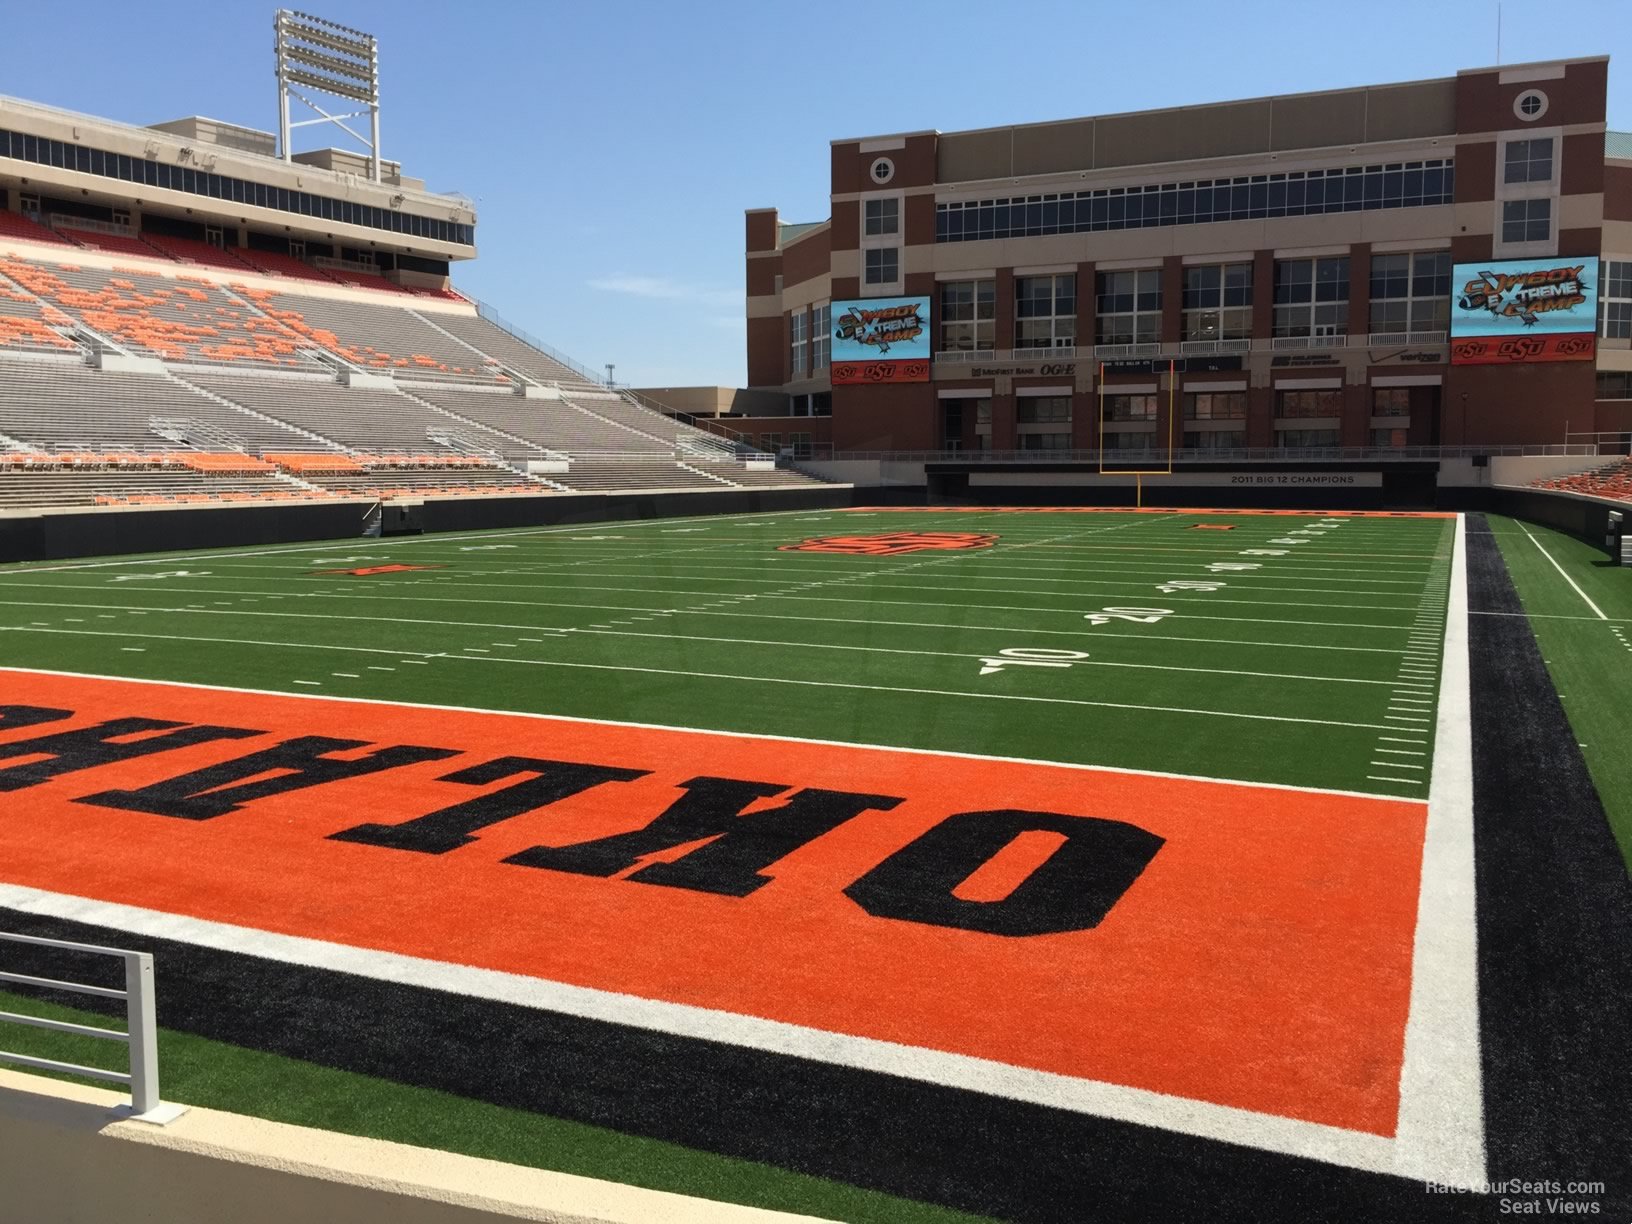 section 109, row 4 seat view  - boone pickens stadium